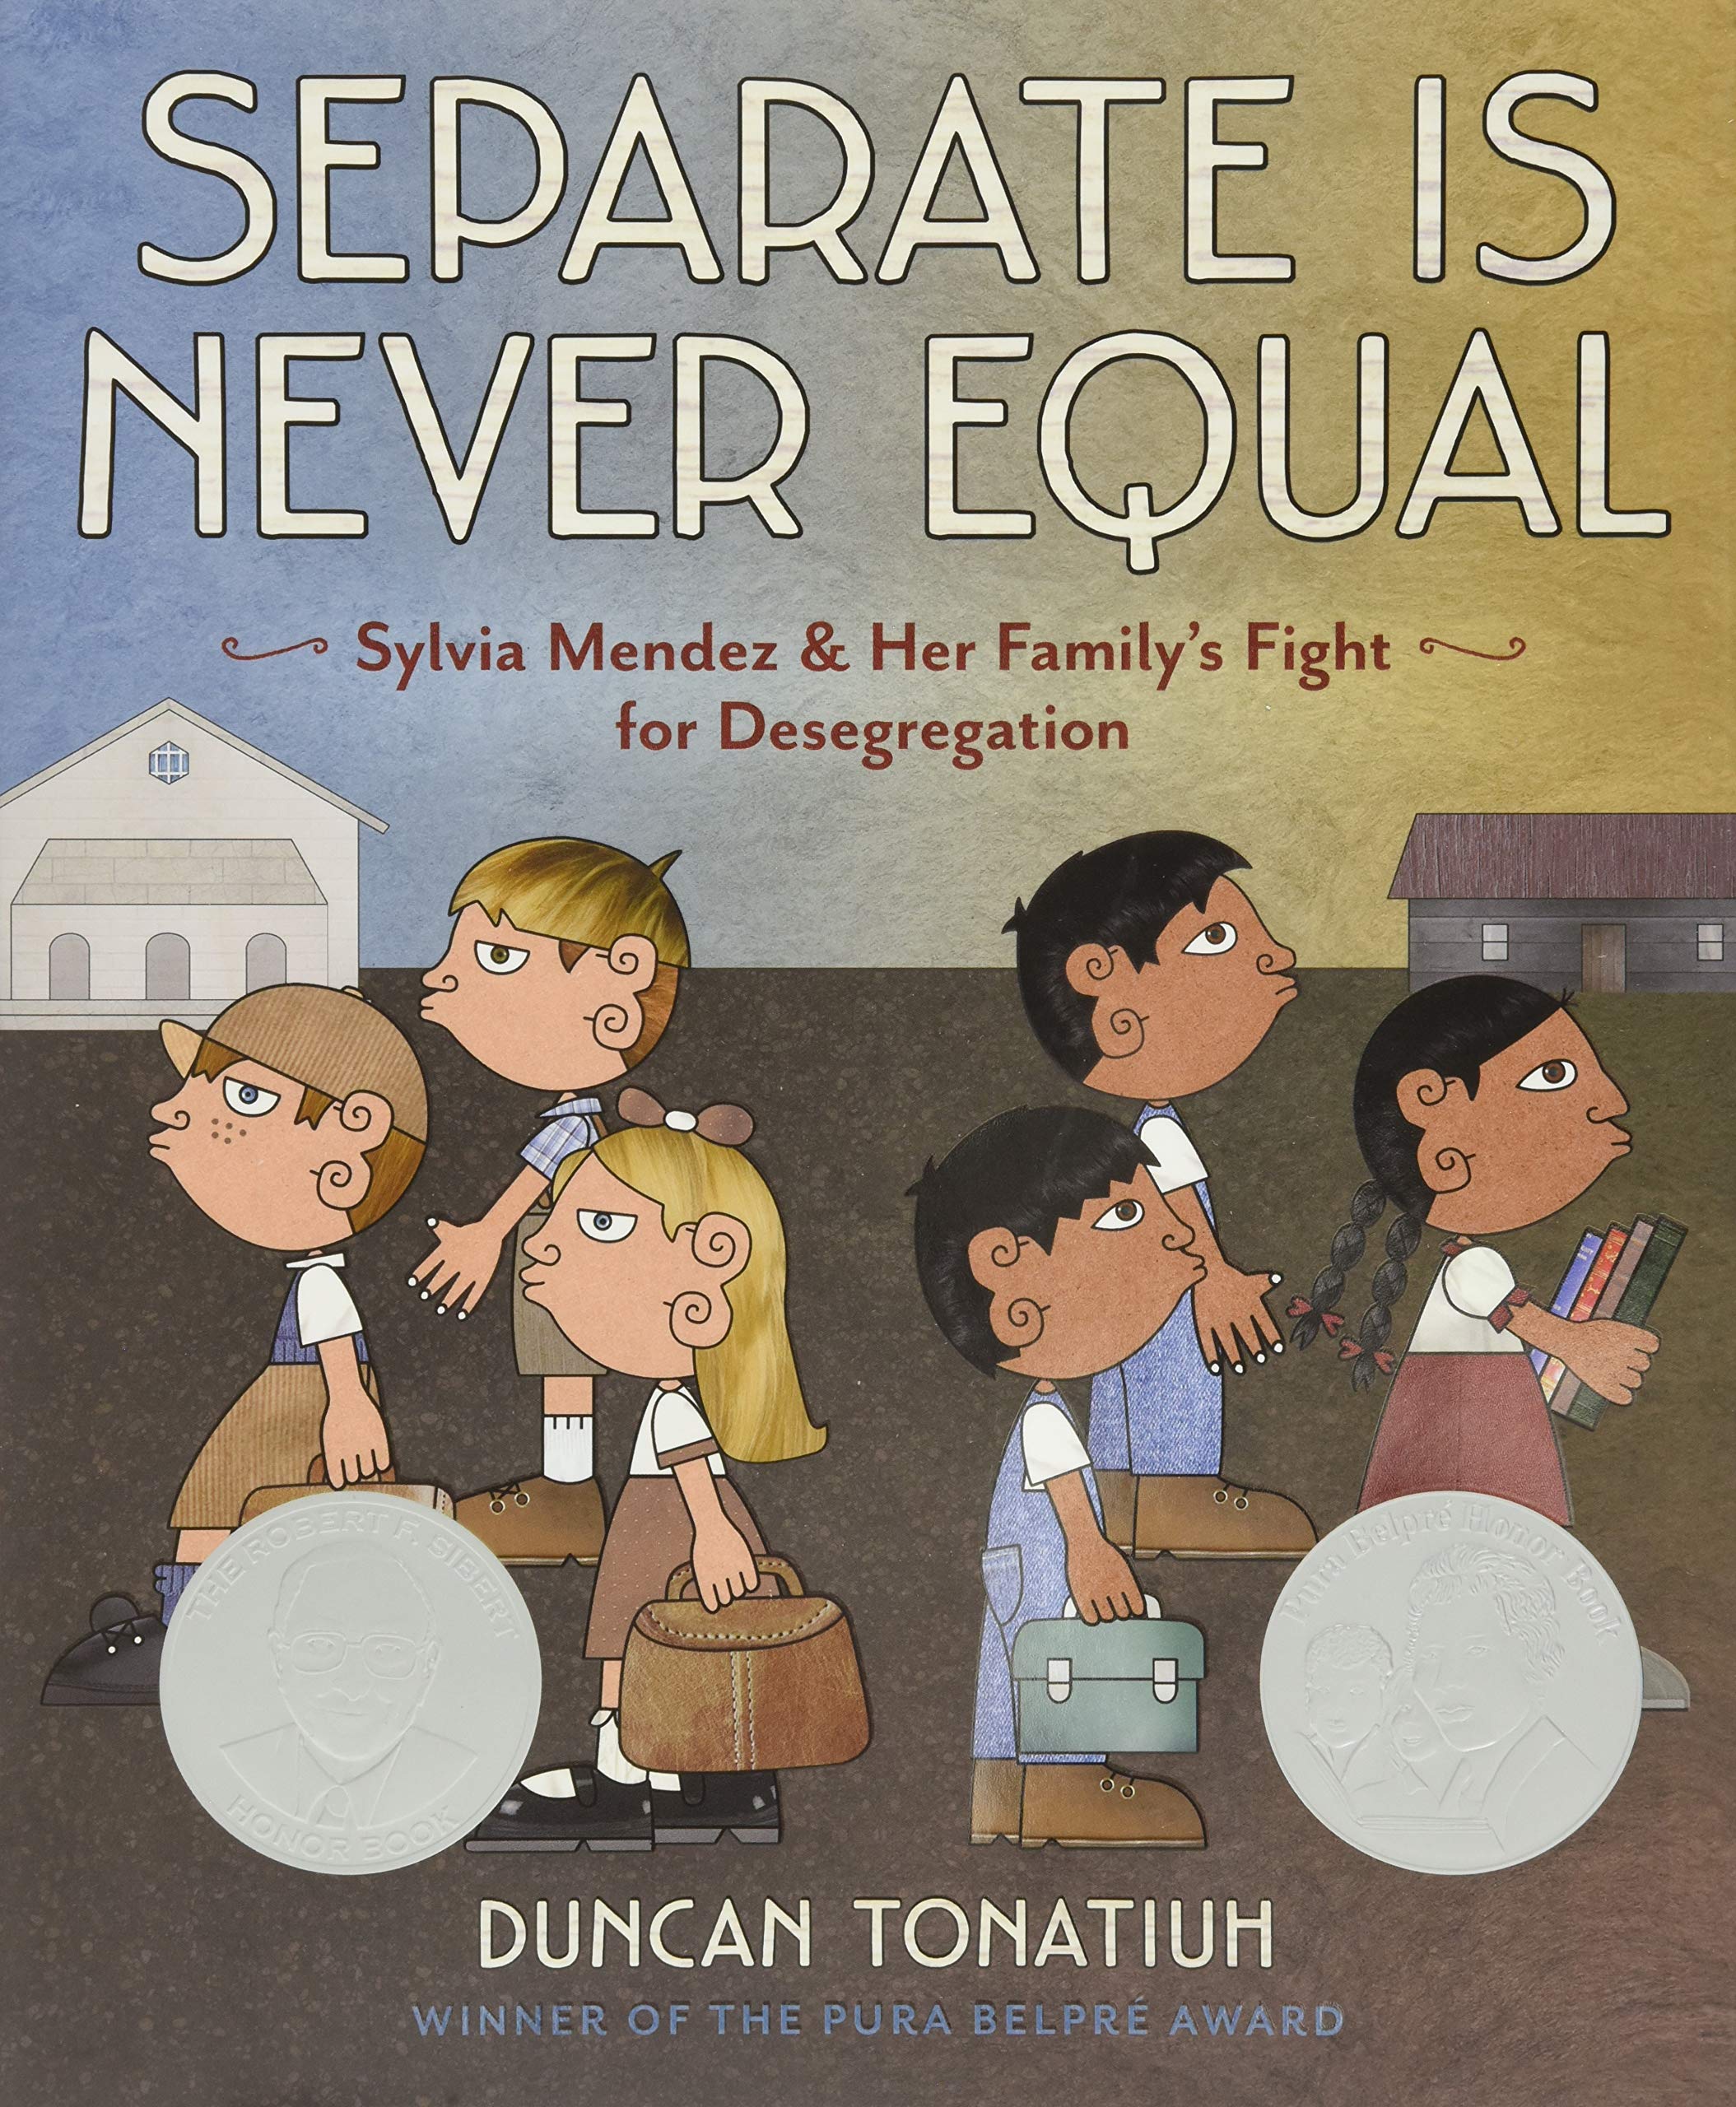 Separate is Never Equal: Mendez & Her Family’s Fight for Desegregation